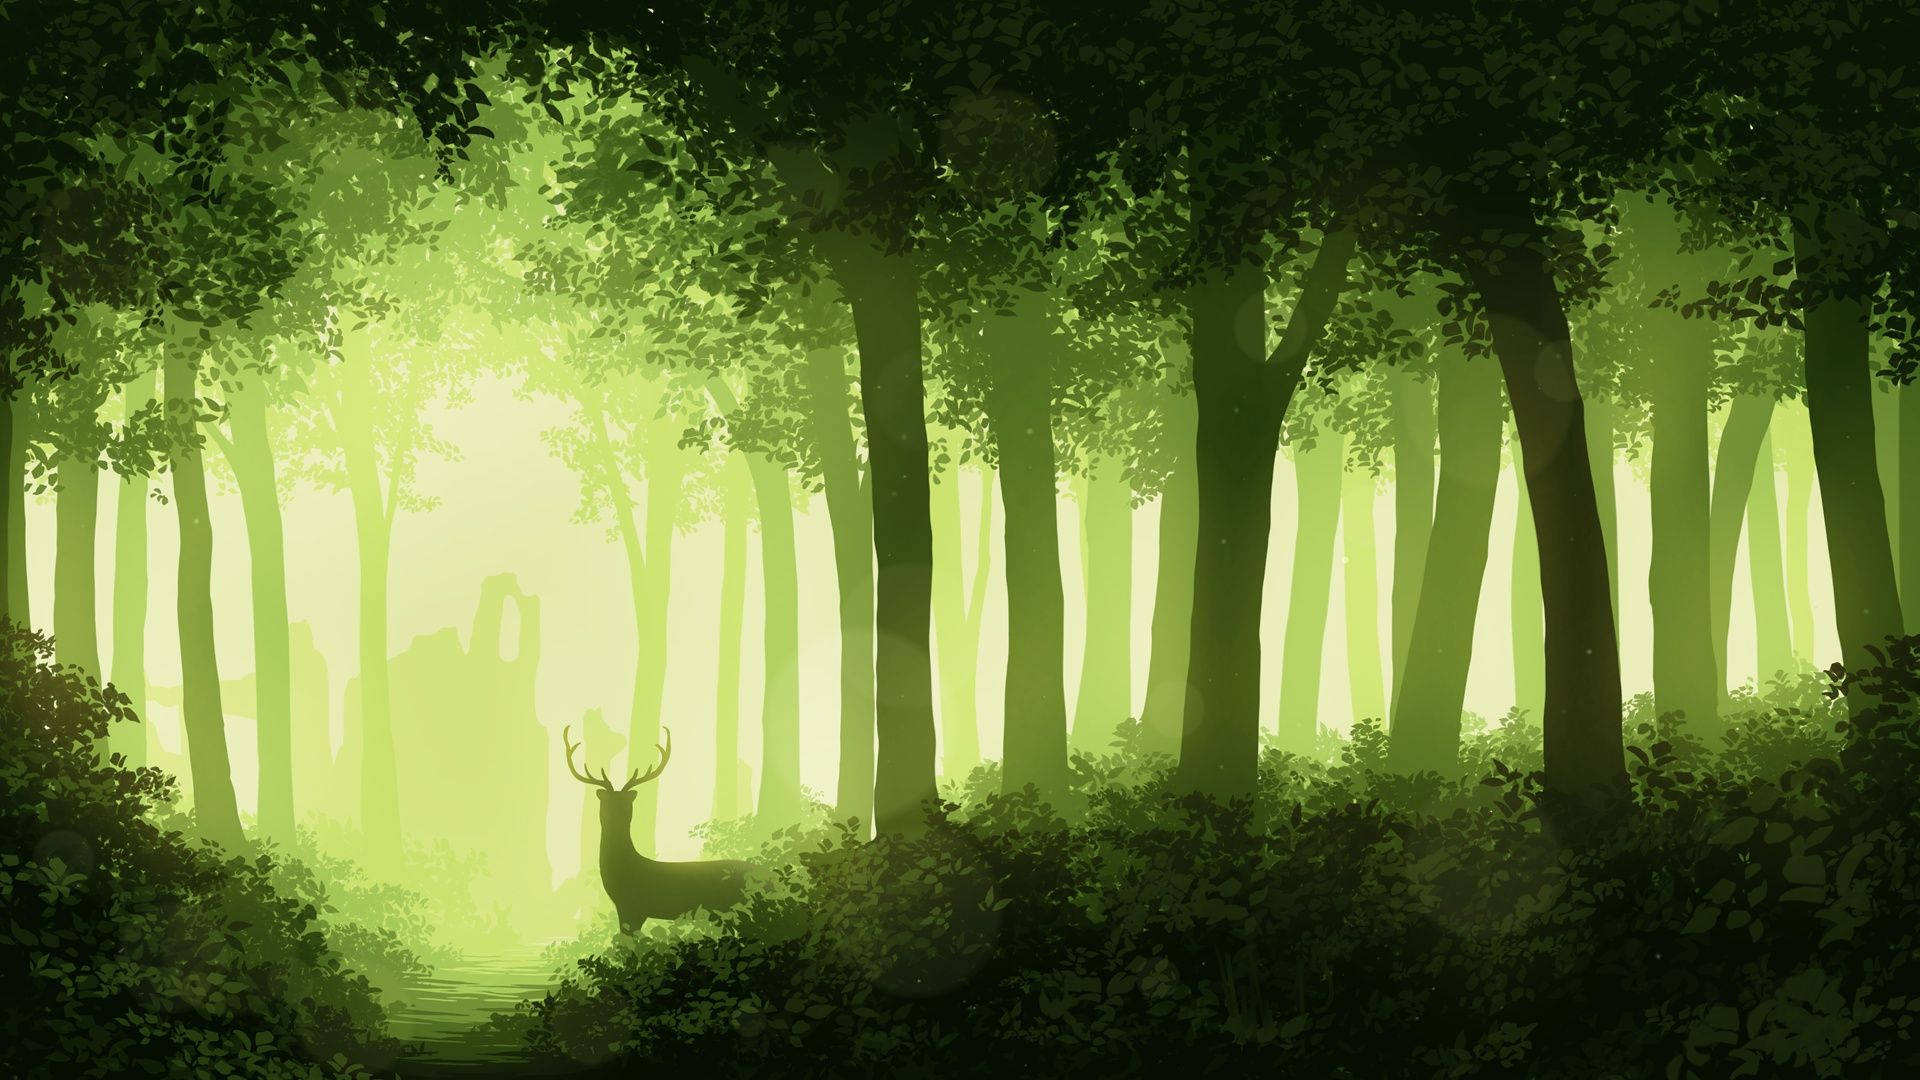 Green forest wallpaper, beautiful, deer, sunlight, forest, nature, wallpaper, background, image, picture - Forest